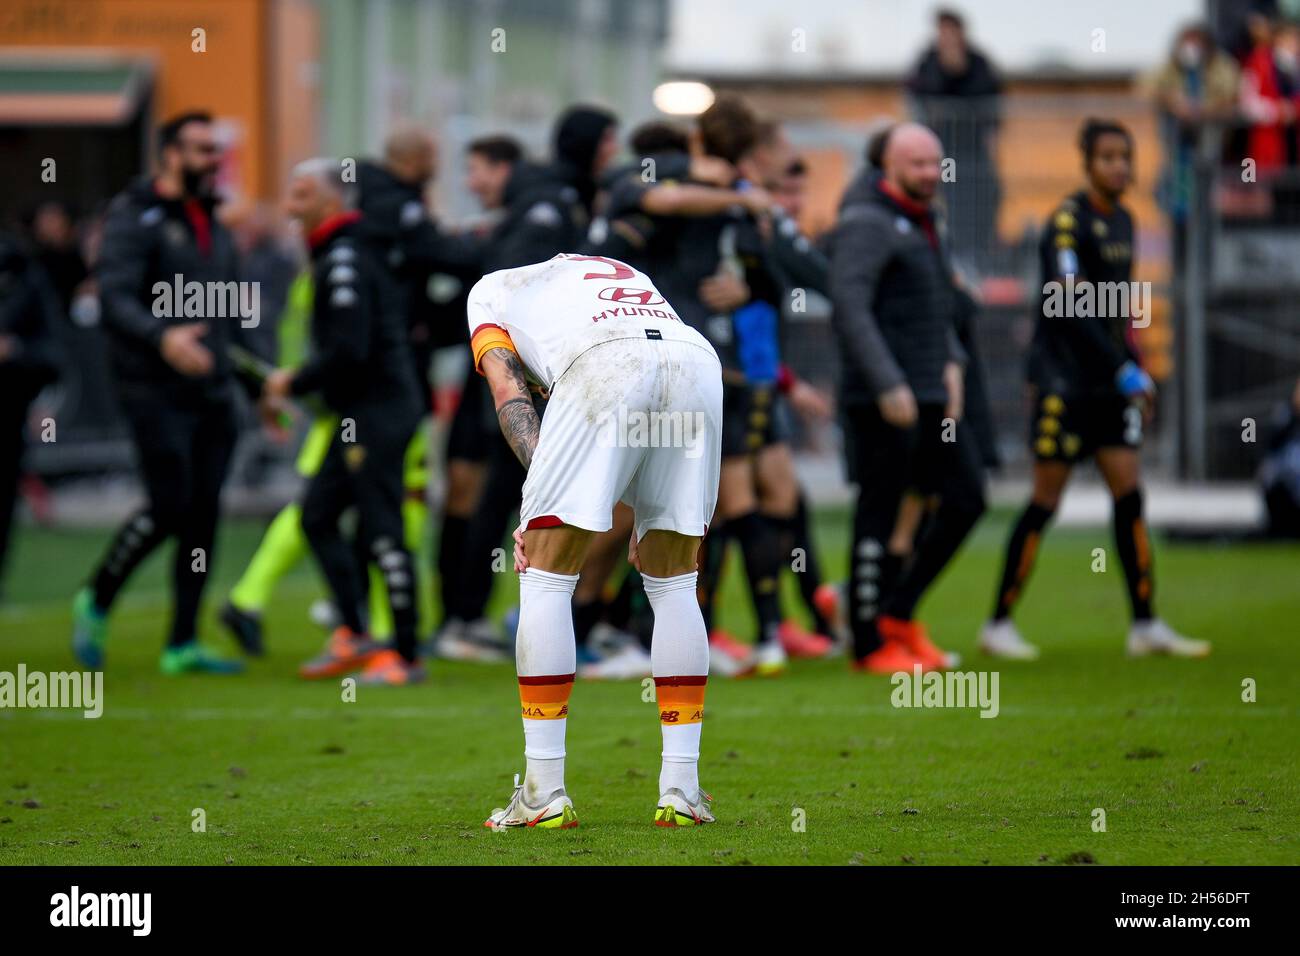 Venice, Italy. 07th Nov, 2021. Disappointment of Roma's Roger Ibanez da Silva after losing the match against Venezia during Venezia FC vs AS Roma, italian soccer Serie A match in Venice, Italy, November 07 2021 Credit: Independent Photo Agency/Alamy Live News Stock Photo